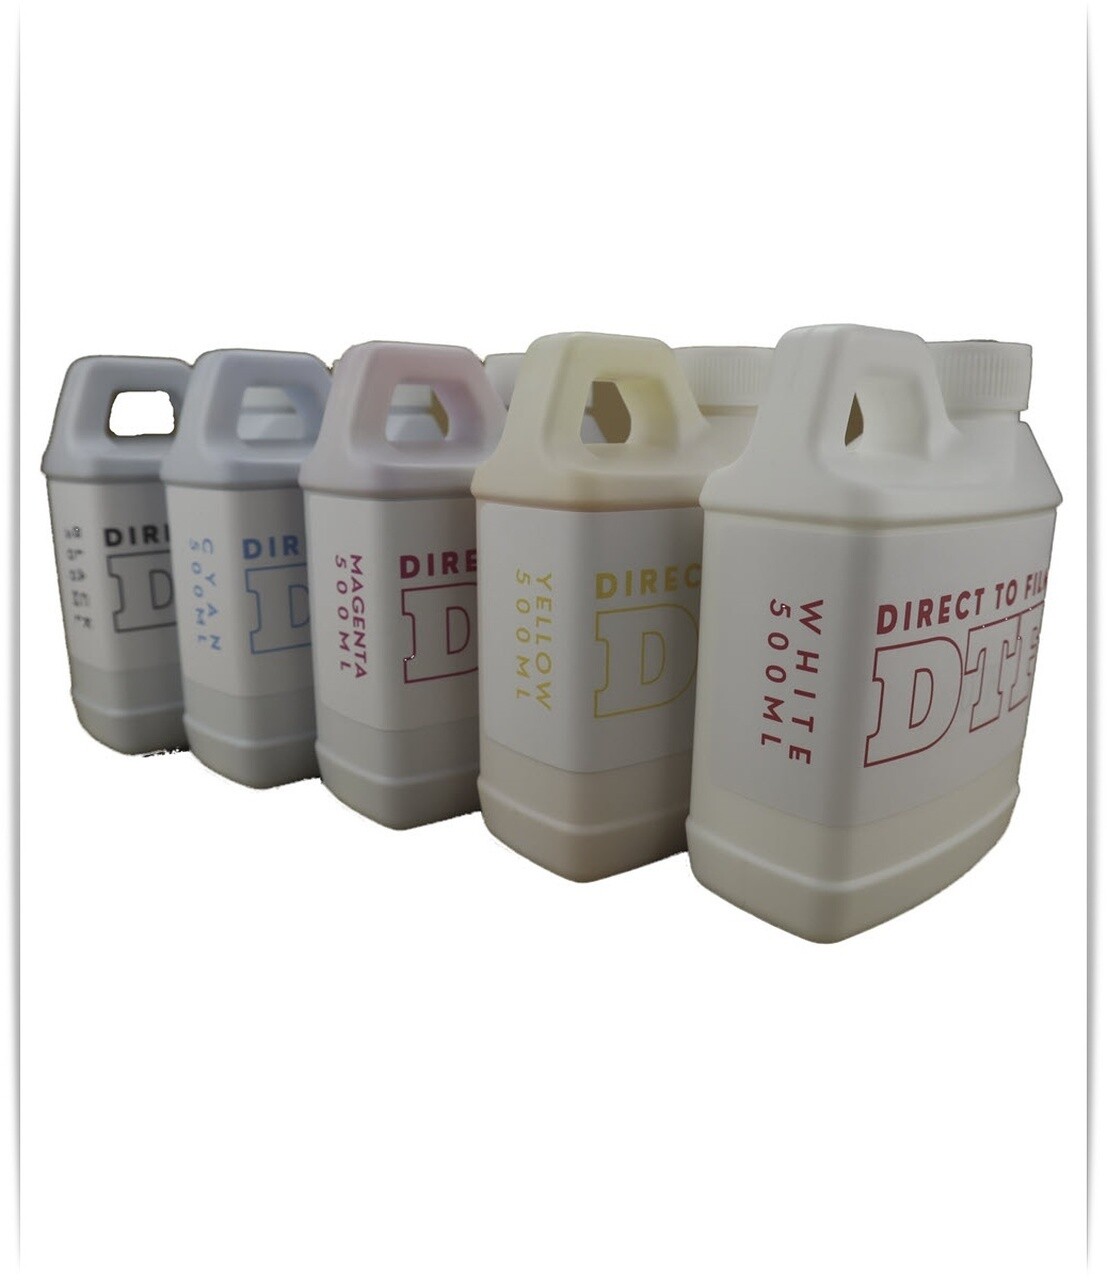 DTF Ink Direct To Film 5- 500ml Bottles for Epson, Epson Print Head printers